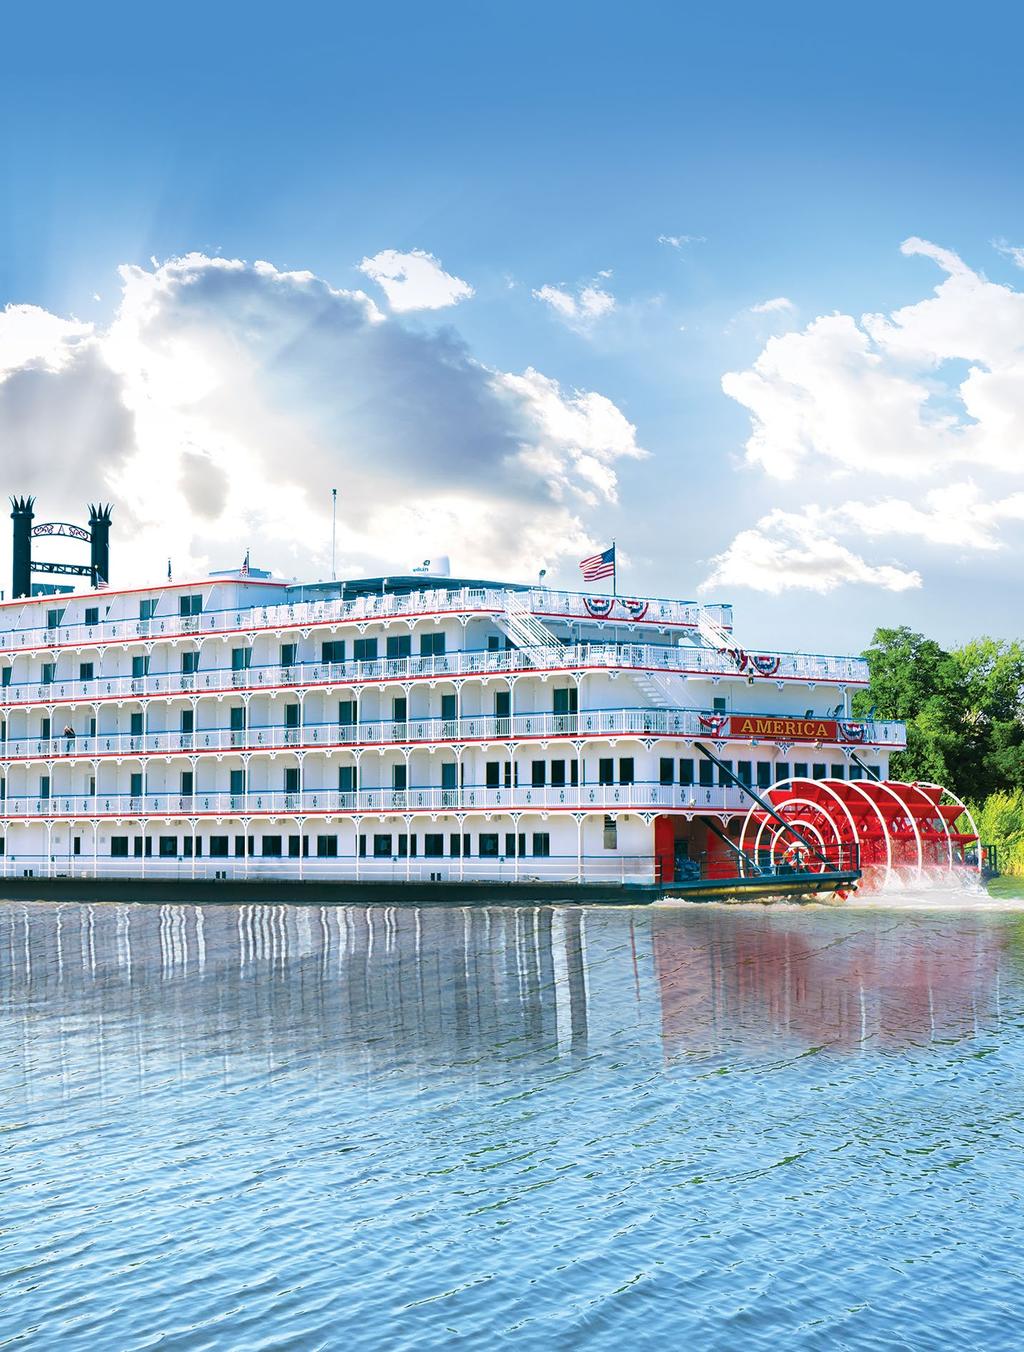 Show Boat on the Mississippi with New York Mississippi Show Boat paddle steamer cruise, New Orleans, Houston, Memphis and New York 06-26 MAY 2019 Remember Scarlett O Hara, complete with crinoline,